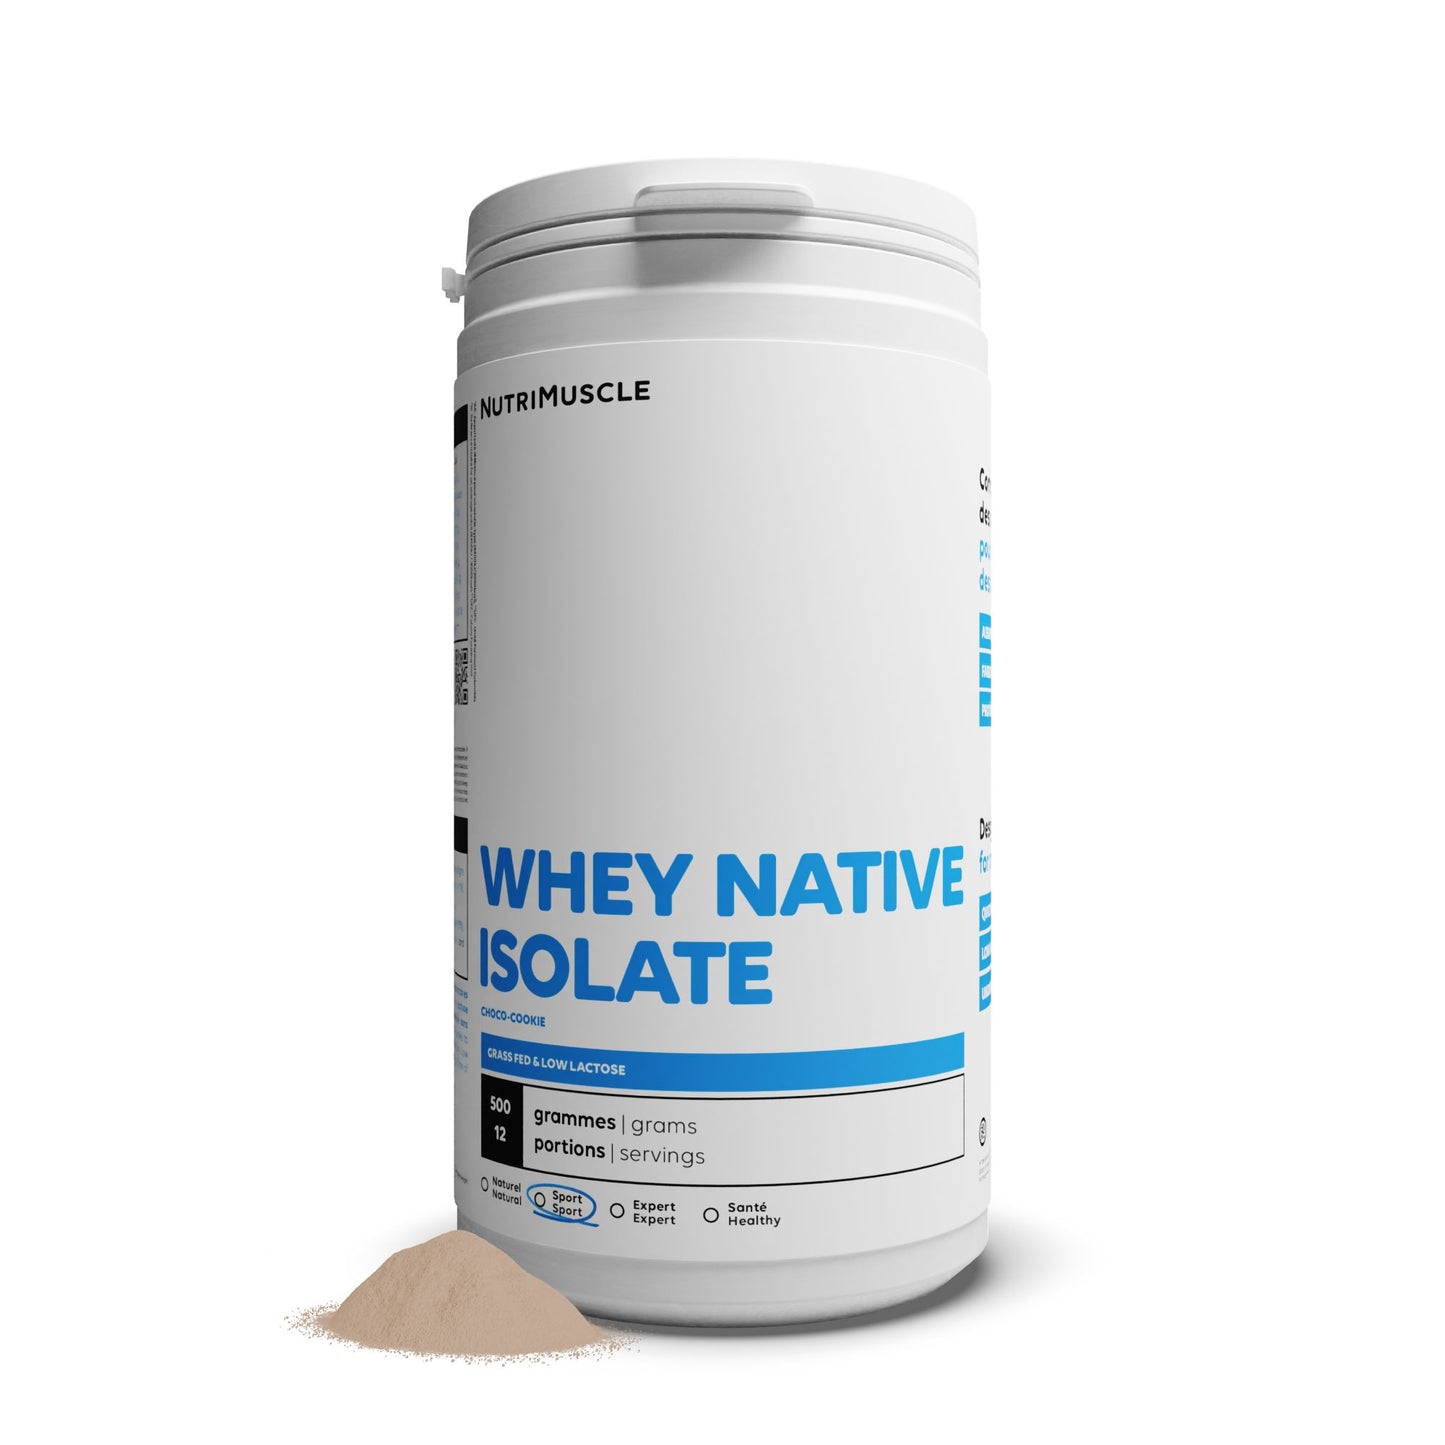 Whey Native Isolate (Low lactose)